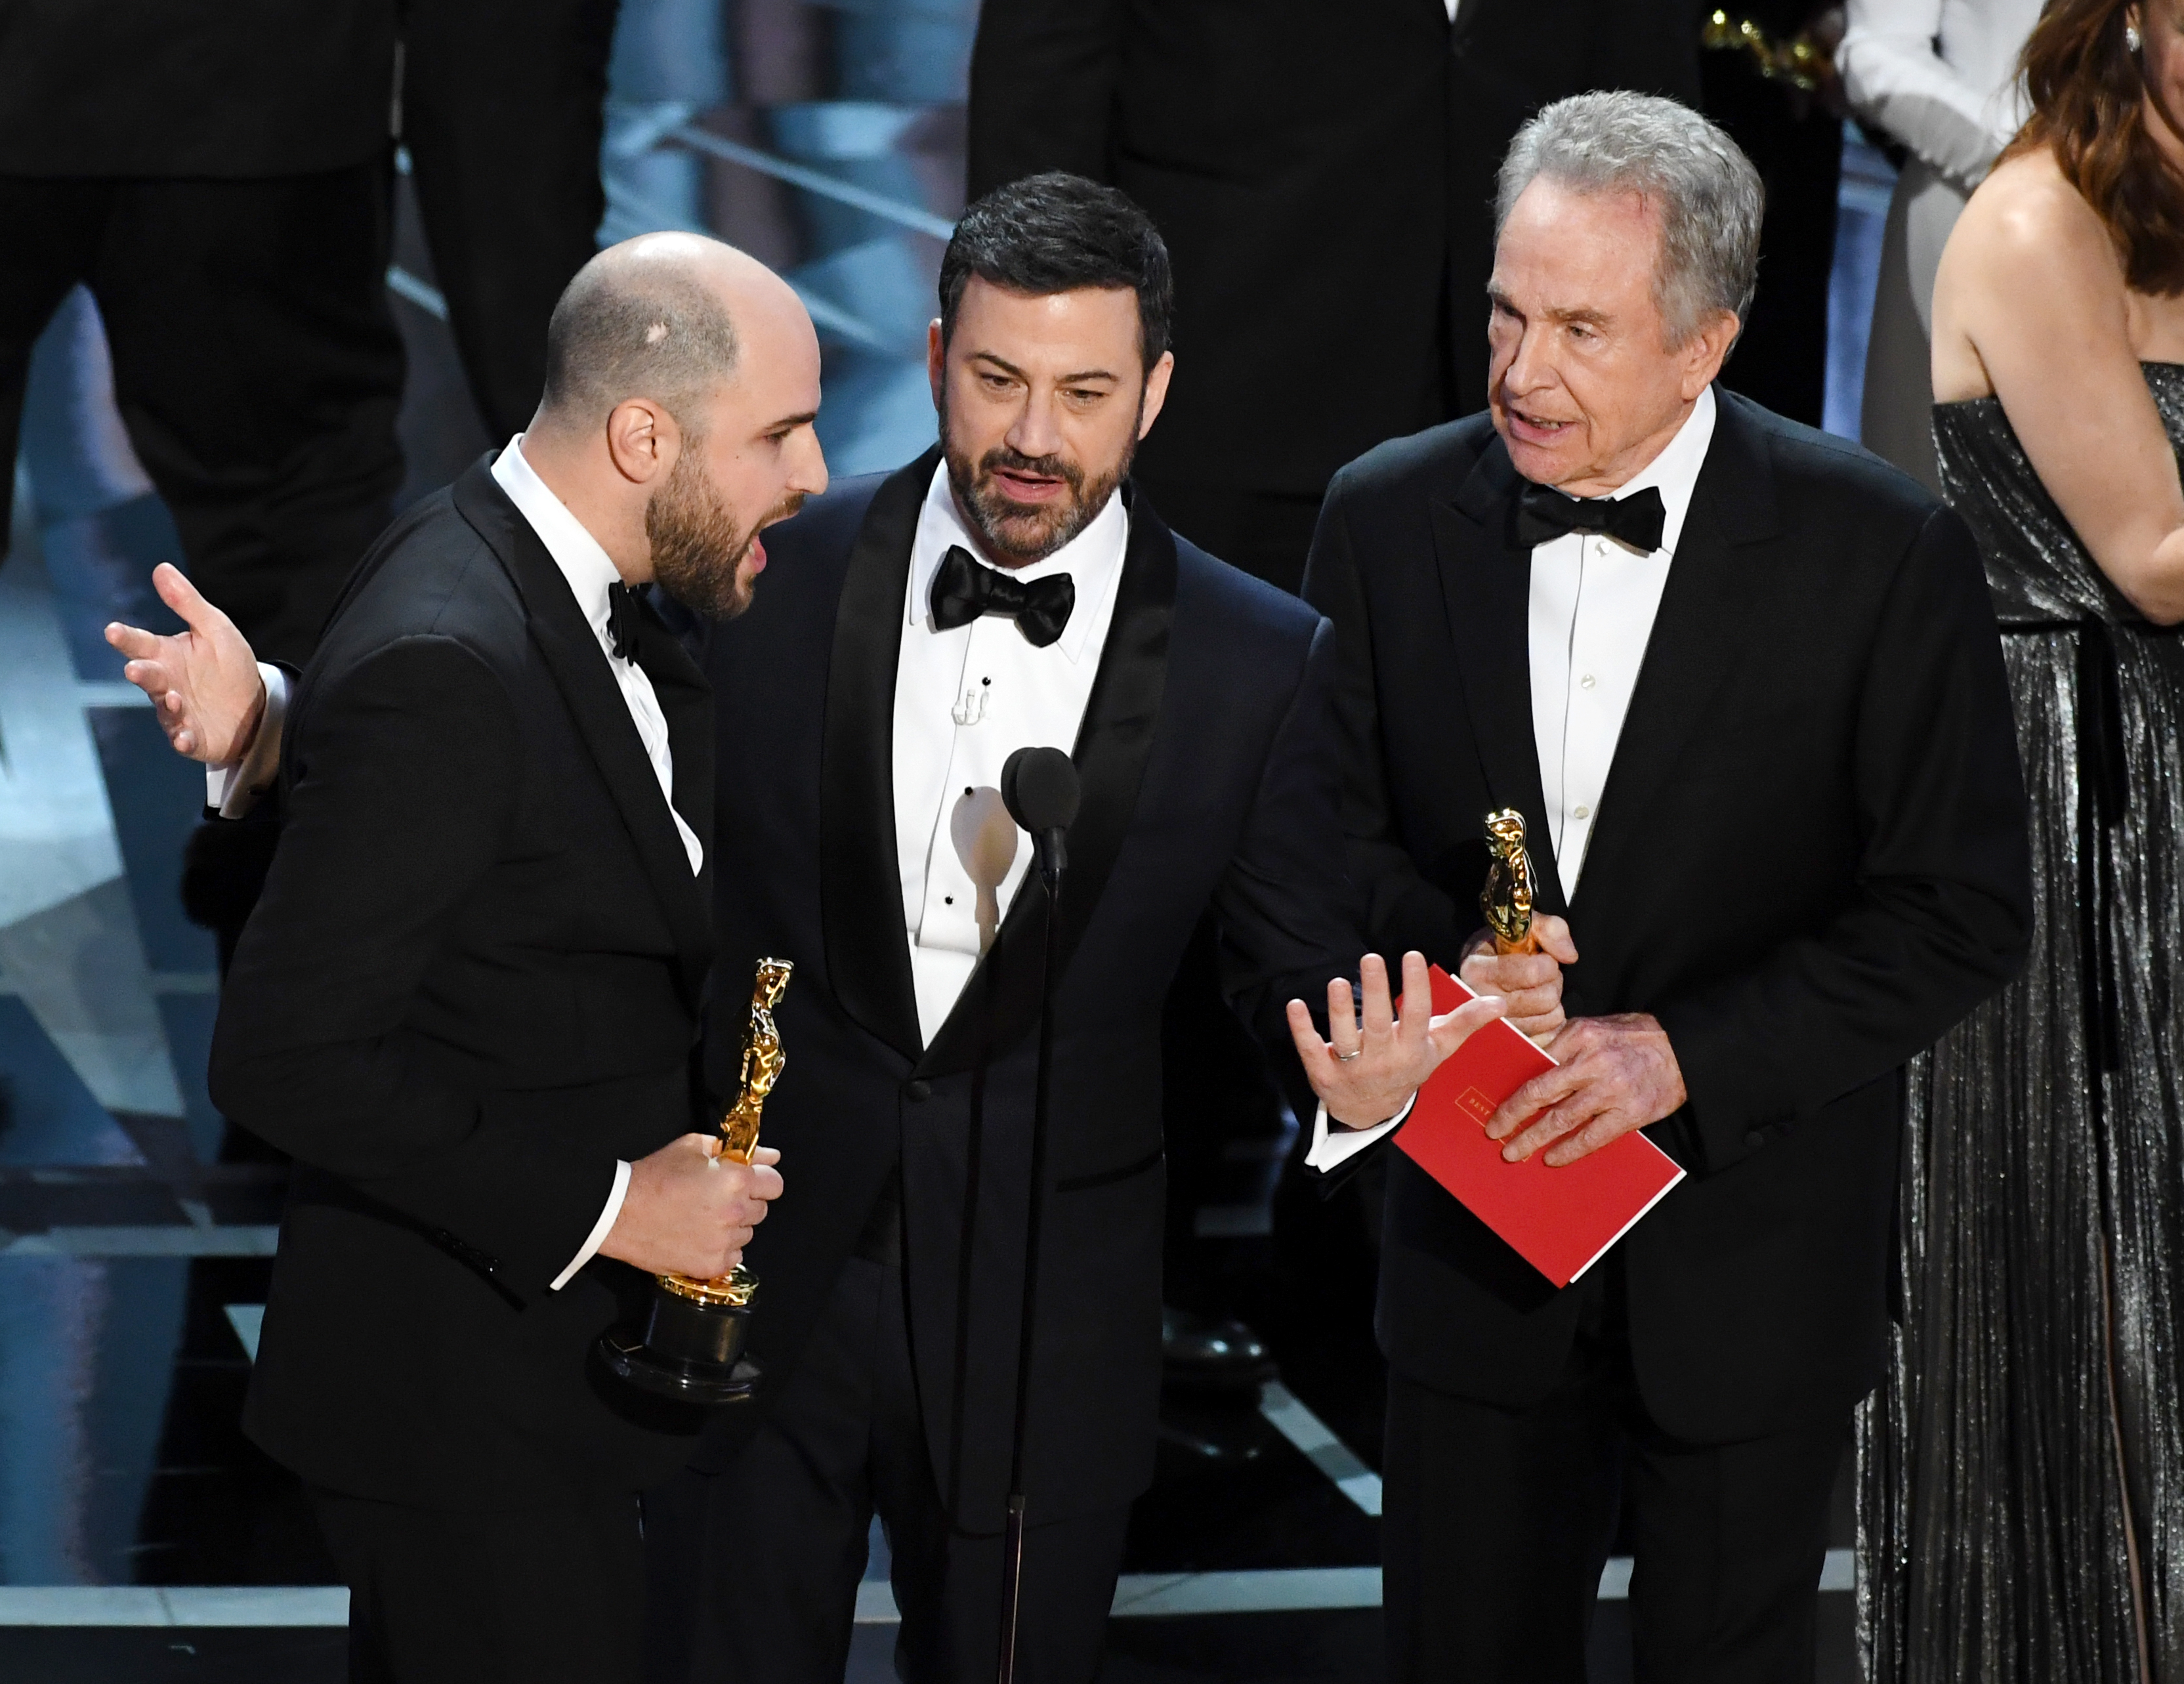 'La La Land' producer Jordan Horowitz (L) announces actual Best Picture winner as 'Moonlight' after a presentation error with host Jimmy Kimmel and actor Warren Beatty onstage during the 89th Annual Academy Awards on February 26, 2017 in Hollywood, California. (Kevin Winter—Getty Images)